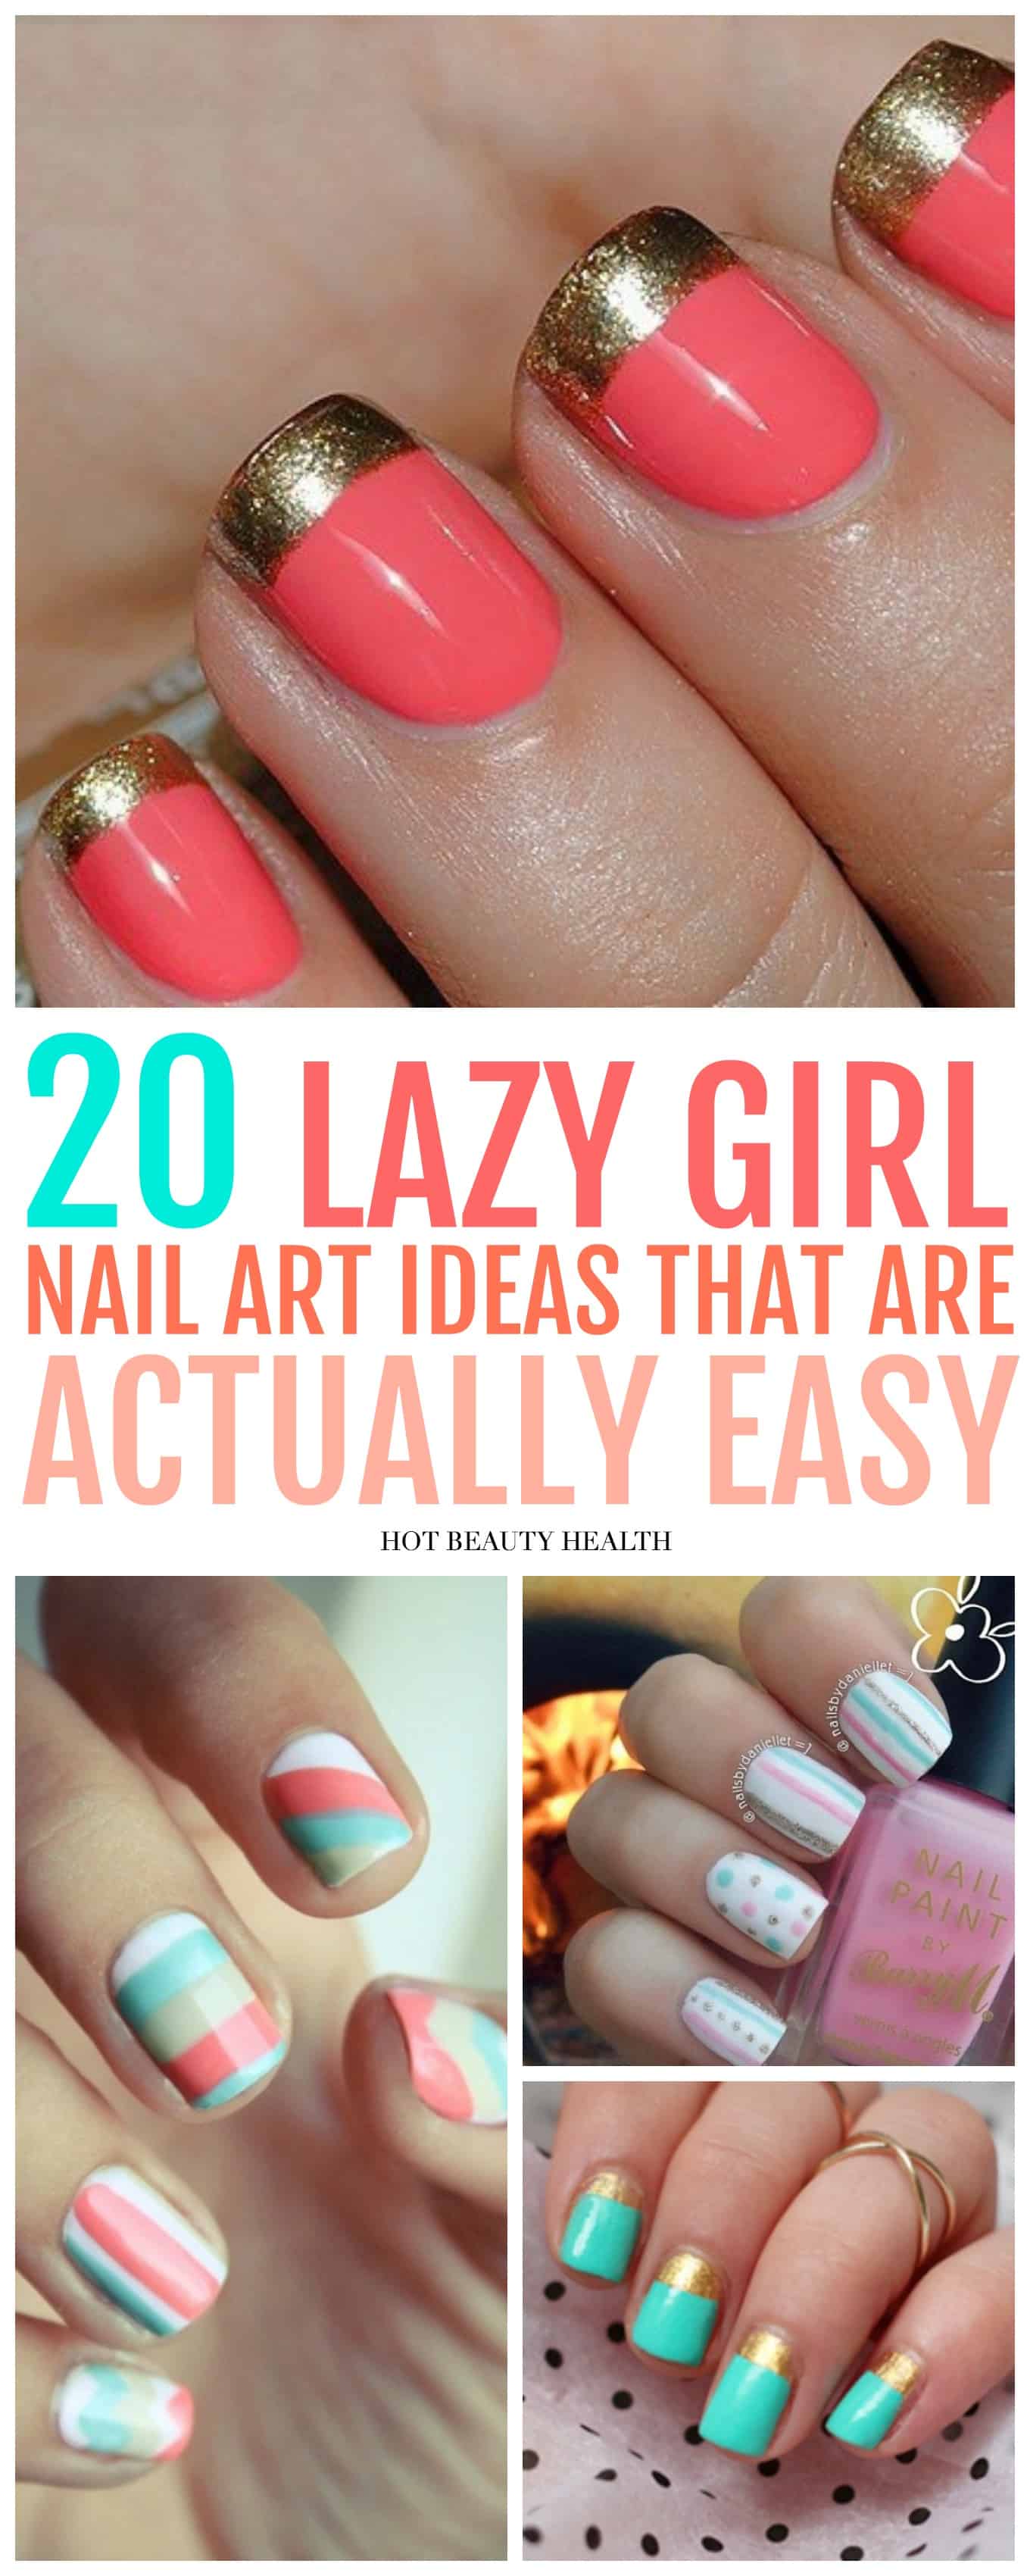 27 Terrific Designs Done With Gel Nail Polish To Try This Season